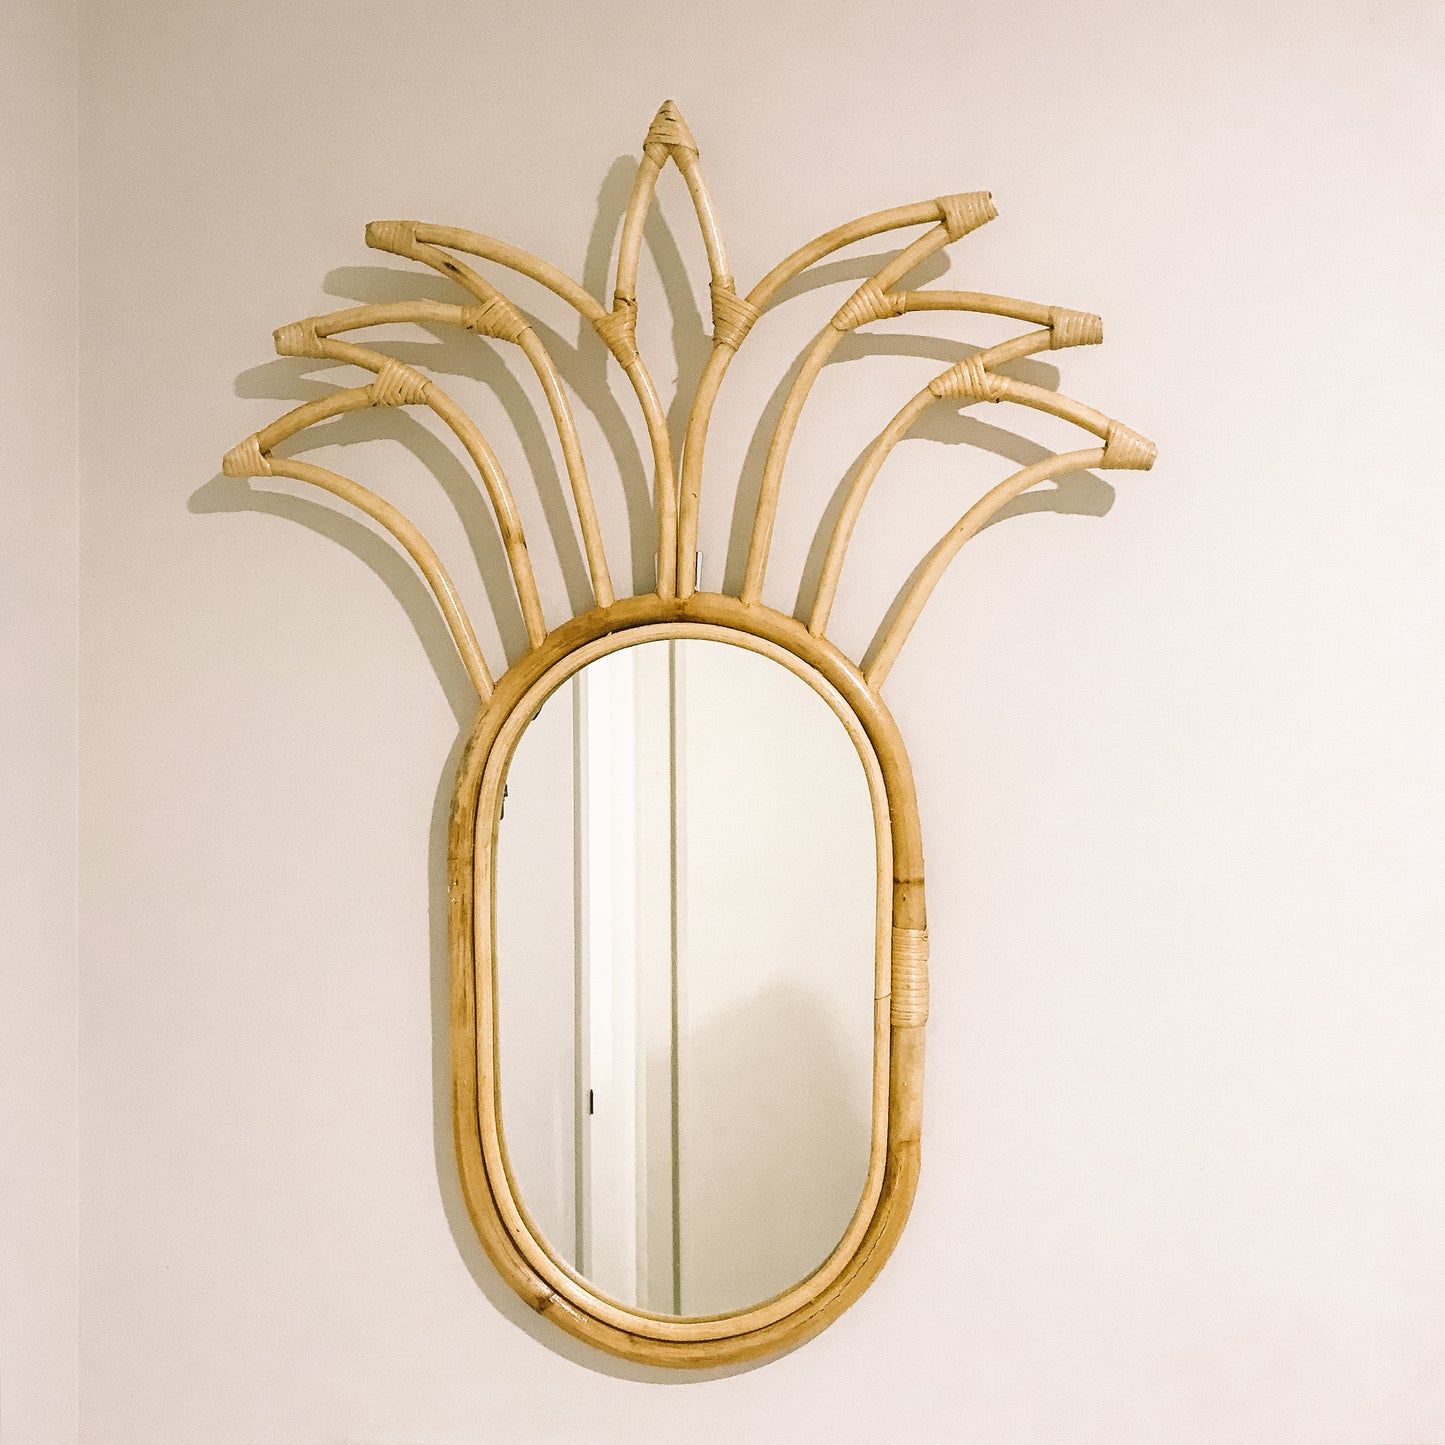 The Pineapple Wall Mirror